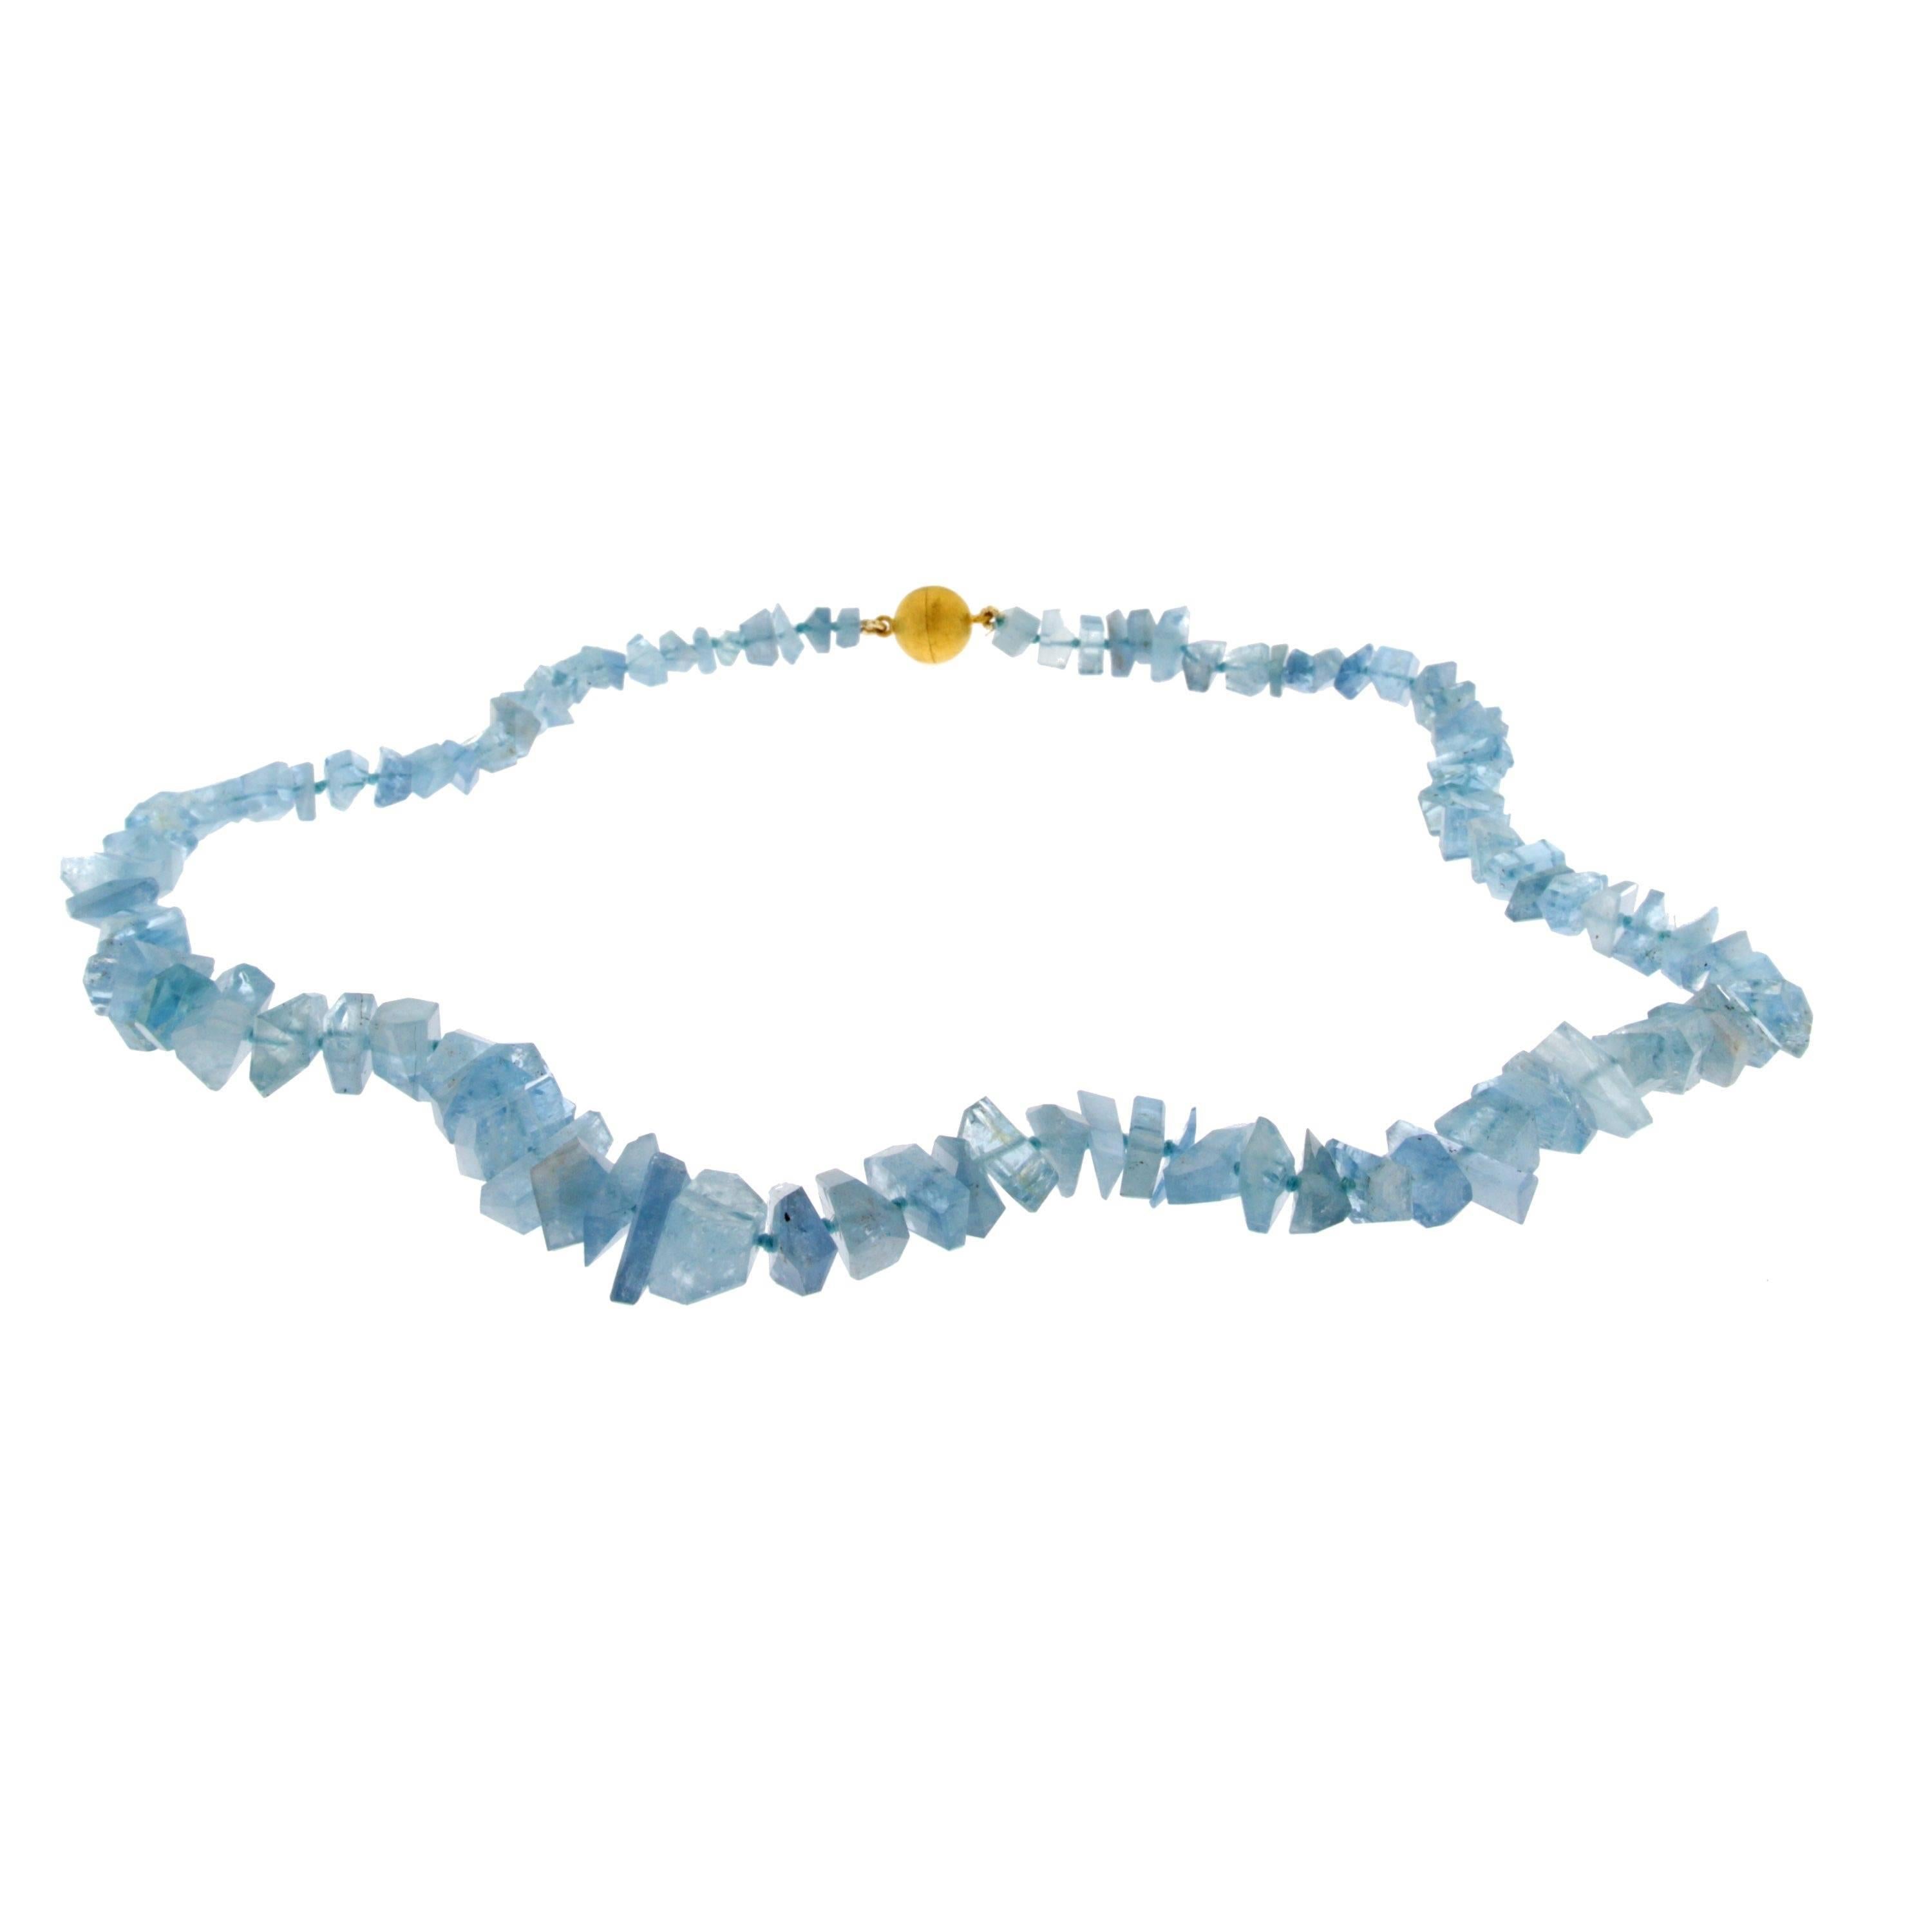 Jona design collection, hand crafted in Italy, faceted aquamarine necklace (22 cm/56 inch) with gilt sterling silver spherical clasp.
All Jona jewelry is new and has never been previously owned or worn. Each item will arrive at your door beautifully